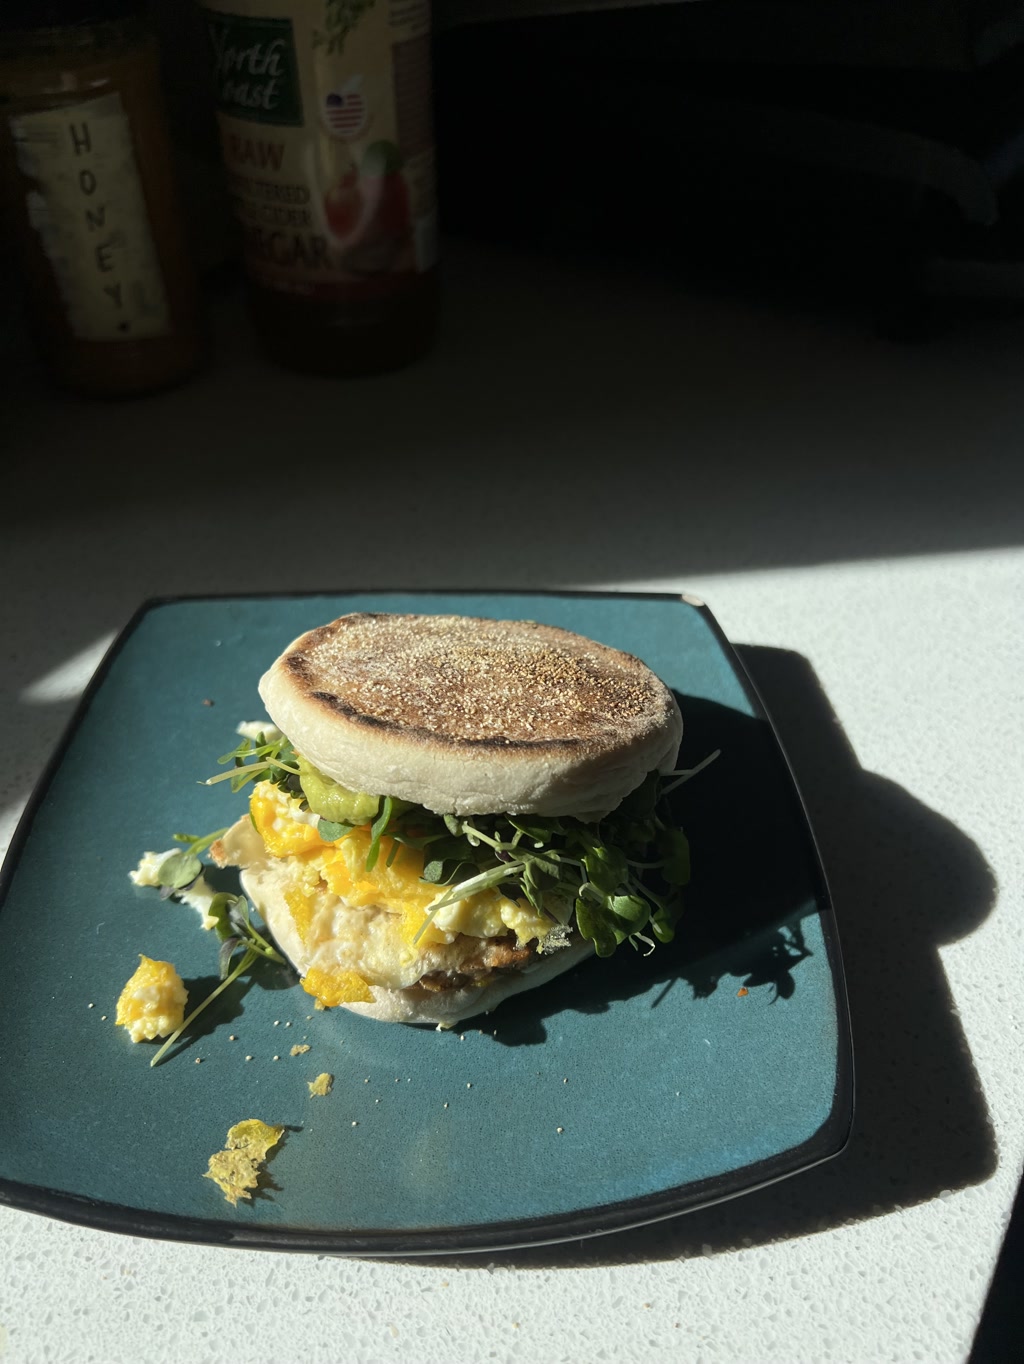 A breakfast sandwich sits on a blue plate, basking in streaming sunlight. It consists of an English muffin, split in half with the top leaning to one side, revealing the ingredients inside. The sandwich is filled with a layer of fluffy, scrambled eggs, vibrant green microgreens, and a slice of melted cheddar cheese. In the background, partially obscured by shadows, are a jar labeled 'HONEY' and a bottle of apple cider vinegar with the 'Bragg' brand visible.